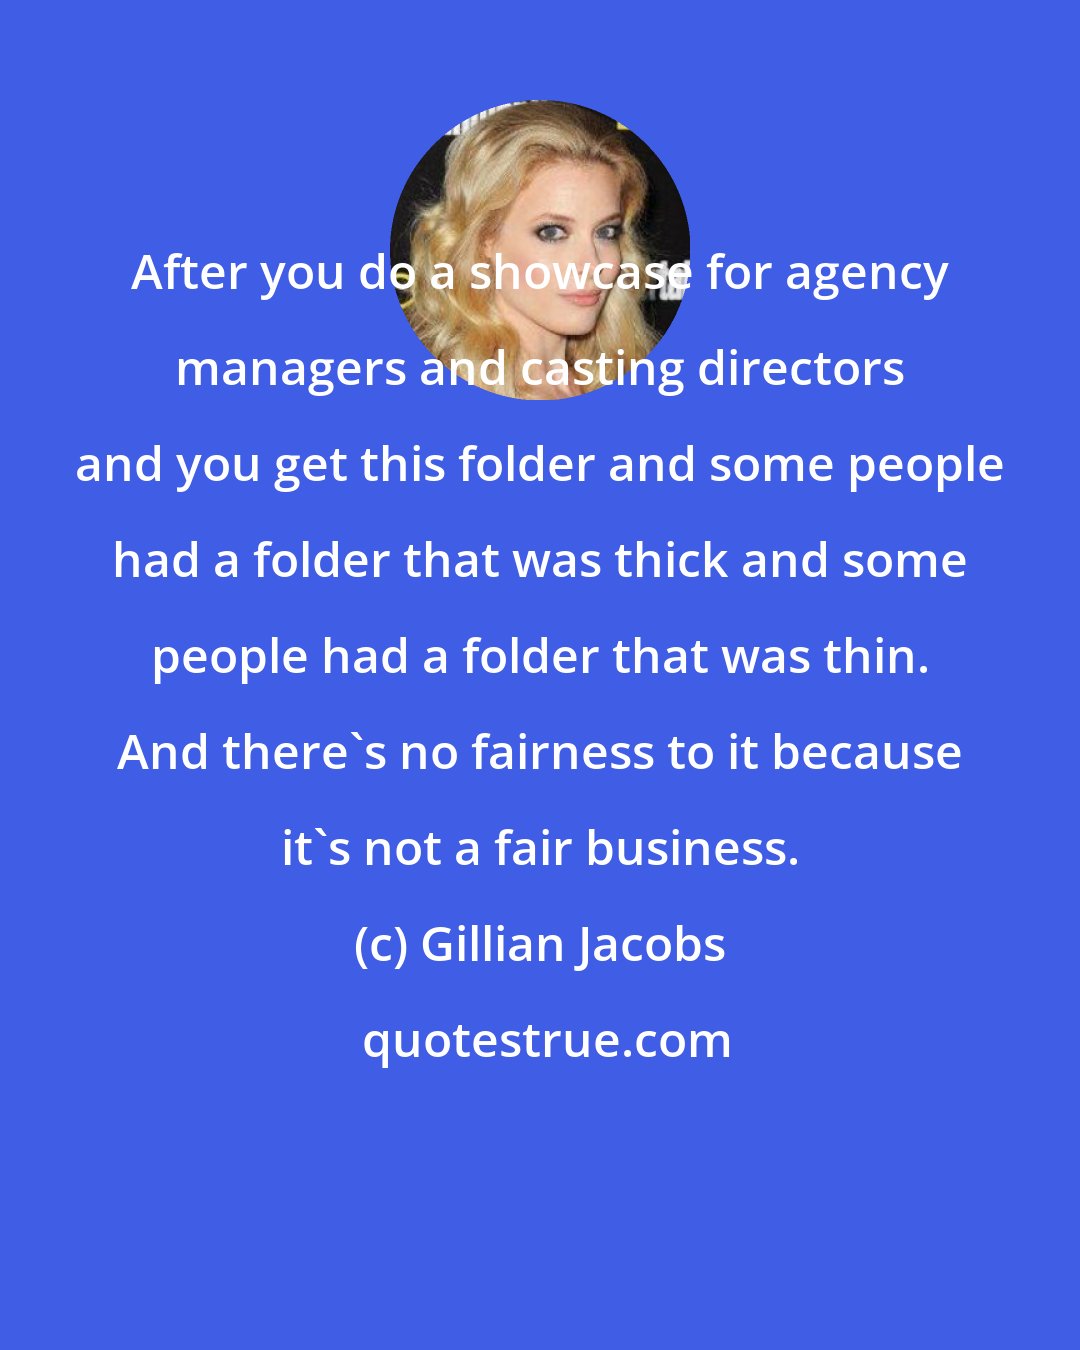 Gillian Jacobs: After you do a showcase for agency managers and casting directors and you get this folder and some people had a folder that was thick and some people had a folder that was thin. And there's no fairness to it because it's not a fair business.